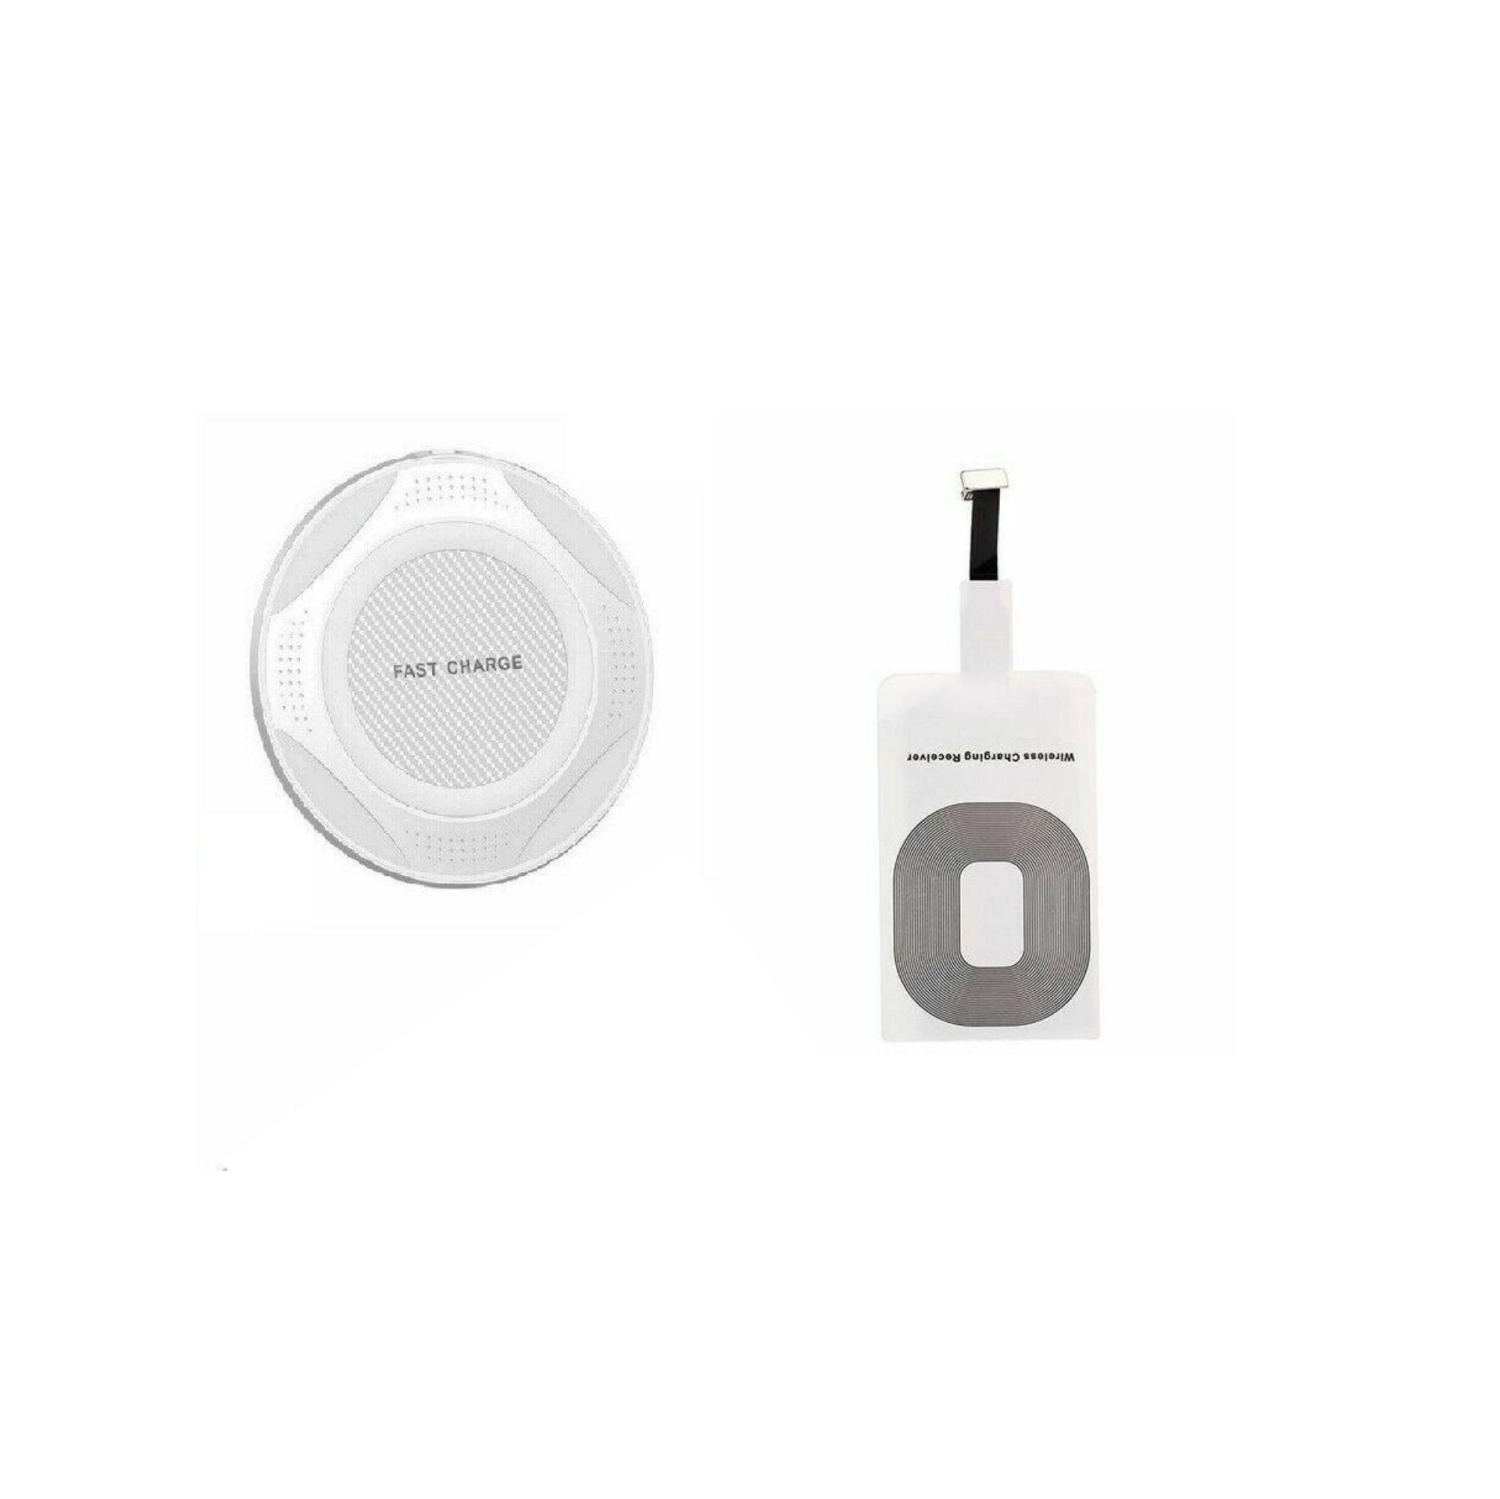 Qi Wireless Charging Receiver Card Charger Module Mat for iPhone 6 6s Plus 5 5s